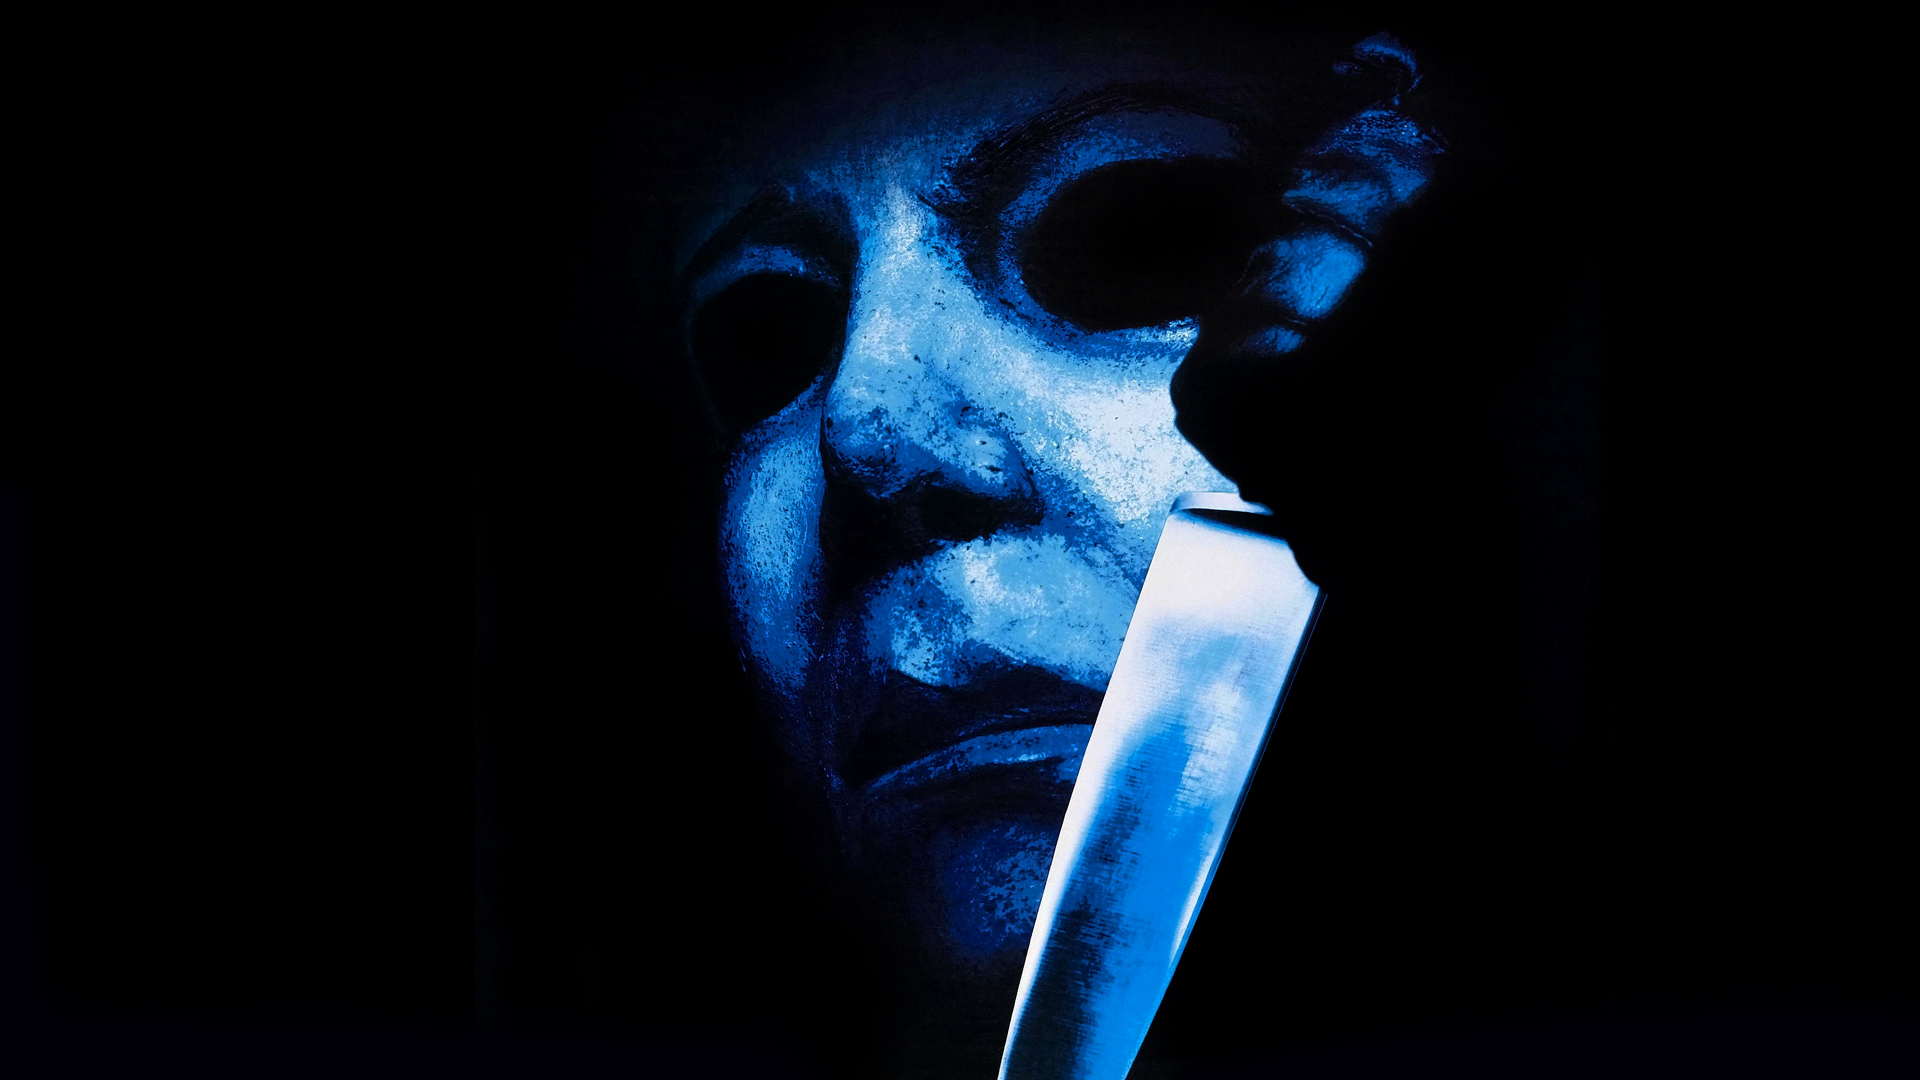 Movie Halloween: The Curse of Michael Myers HD Wallpaper | Background Image